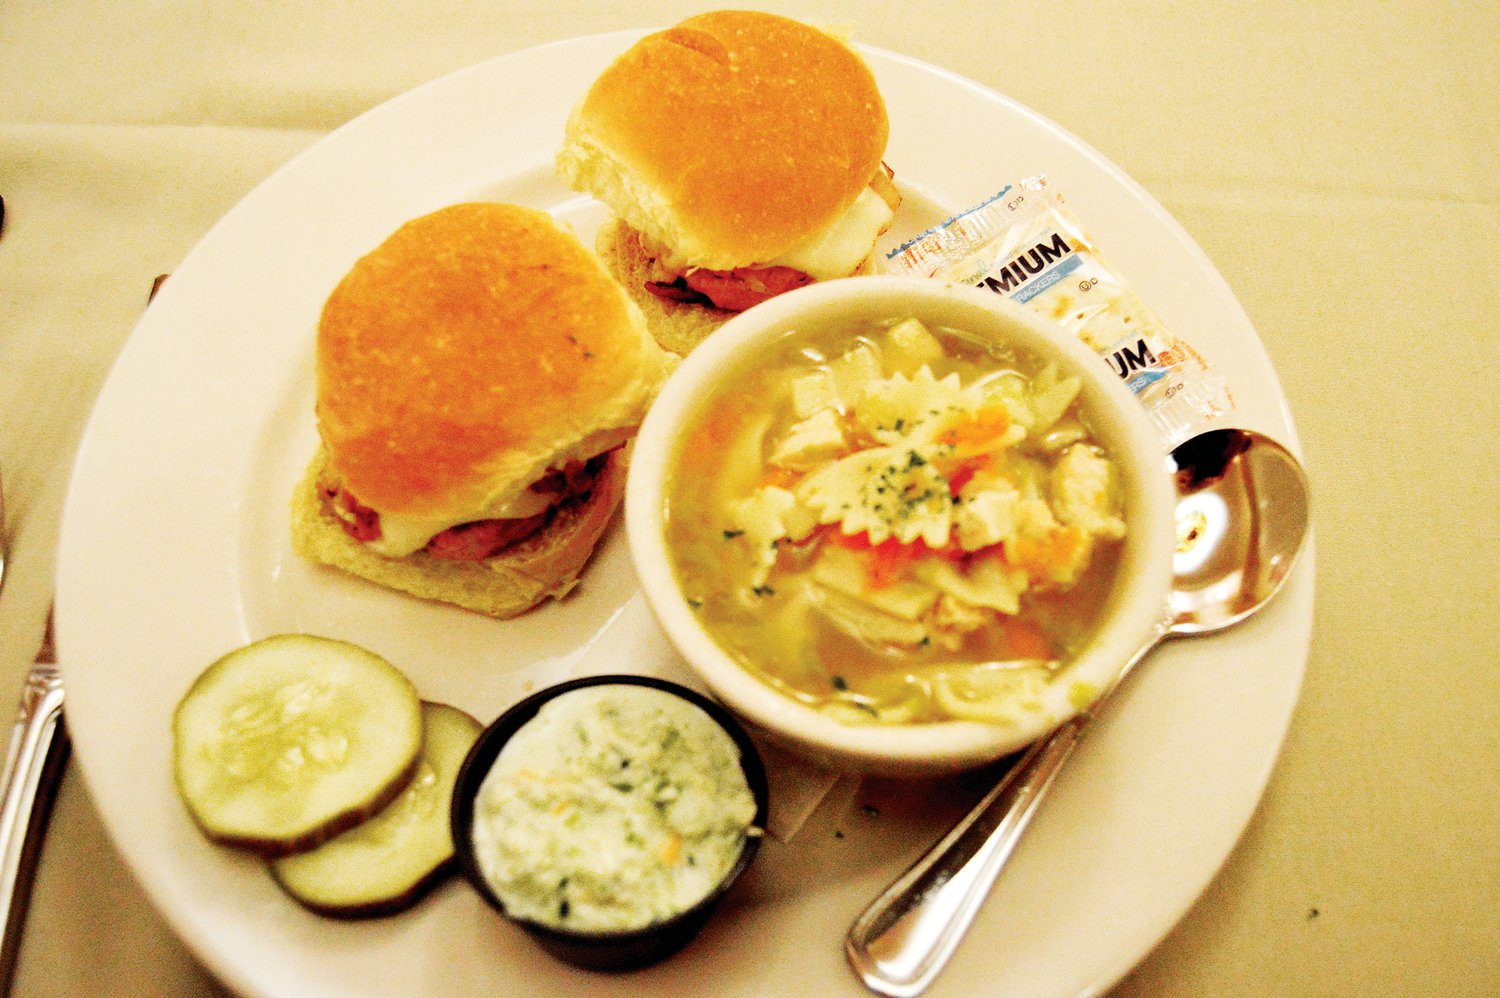 Turkey sliders and homemade chicken noodle soup were among the specials on a recent day at the Gardenville Hotel. Photograph by Susan S. Yeske.